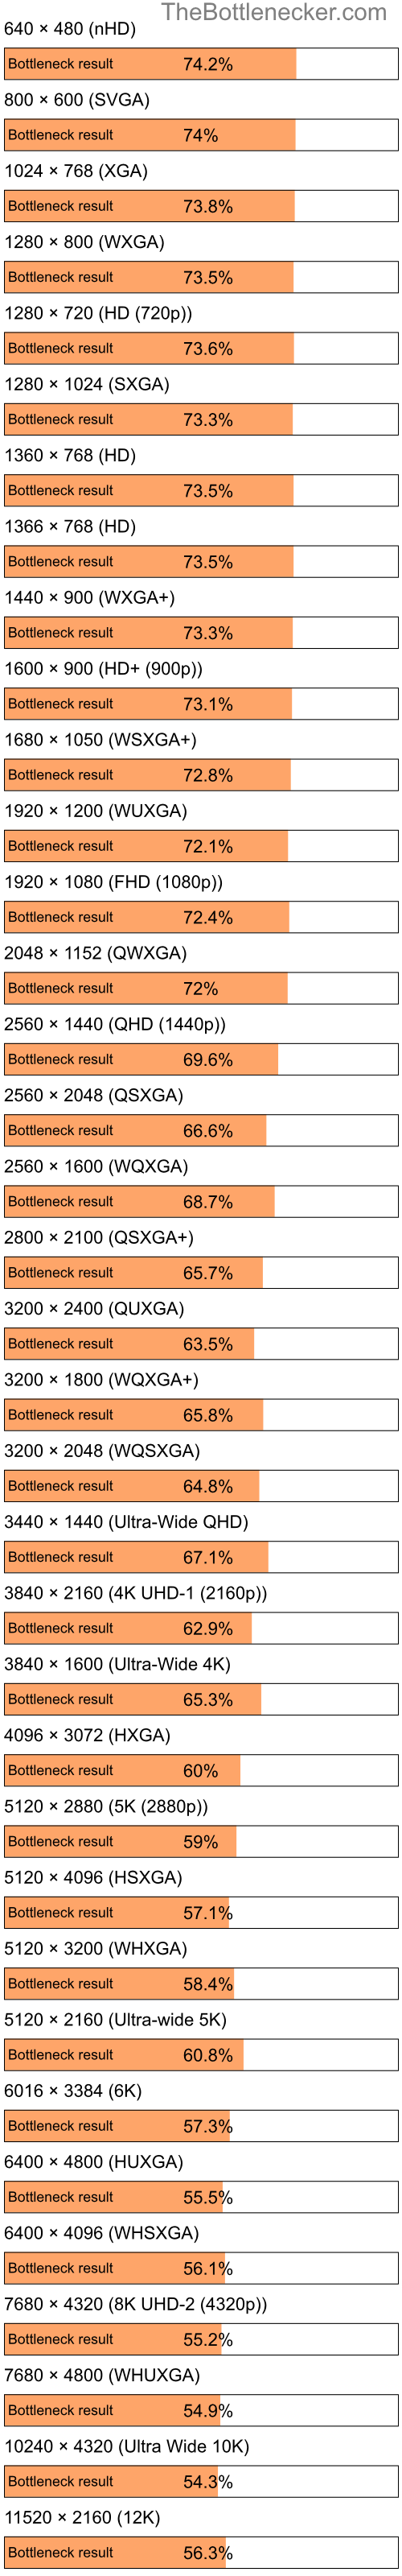 Bottleneck results by resolution for Intel Pentium 4 and AMD Radeon RX 6500 XT in Graphic Card Intense Tasks